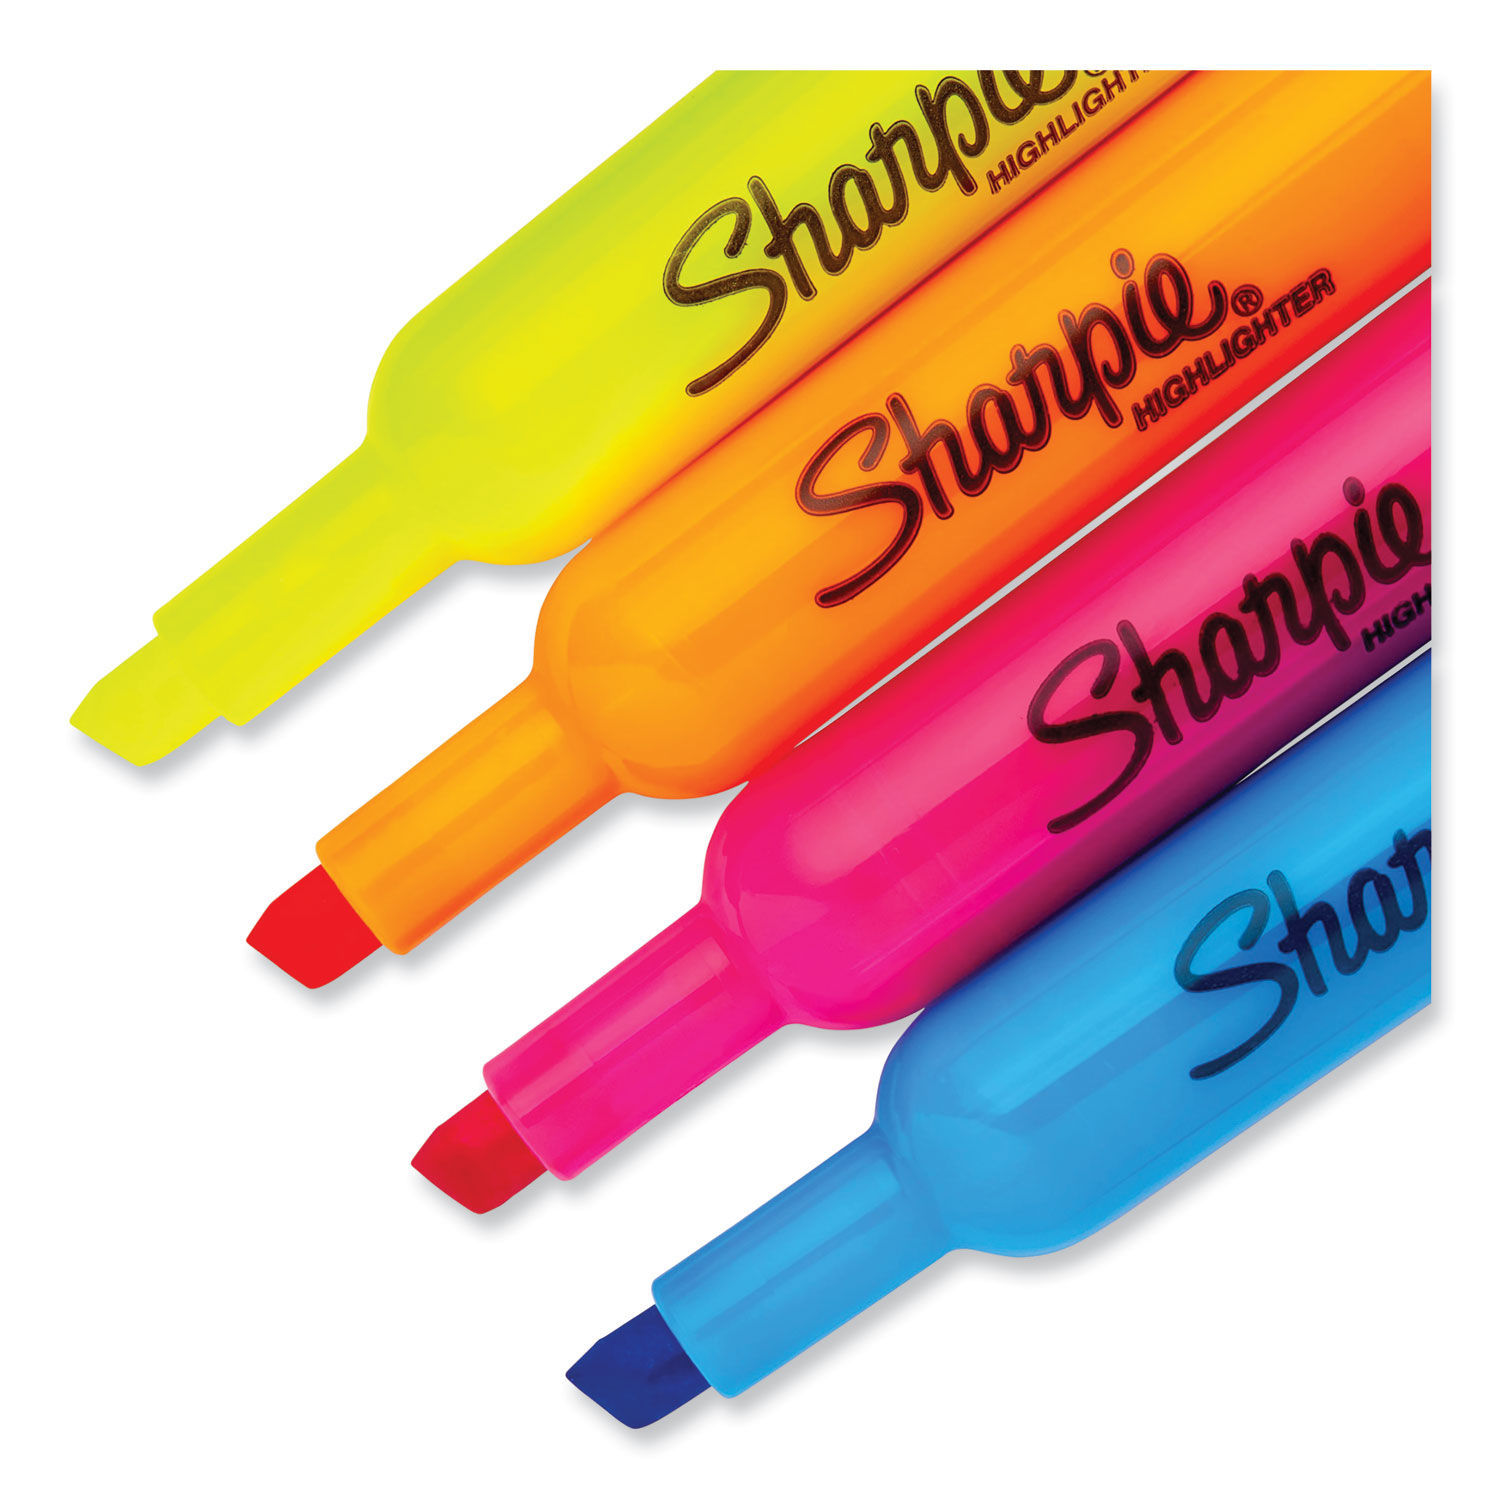 Sharpie Tank Style Highlighters, Chisel Tip, Assorted Colors, 5/Pack